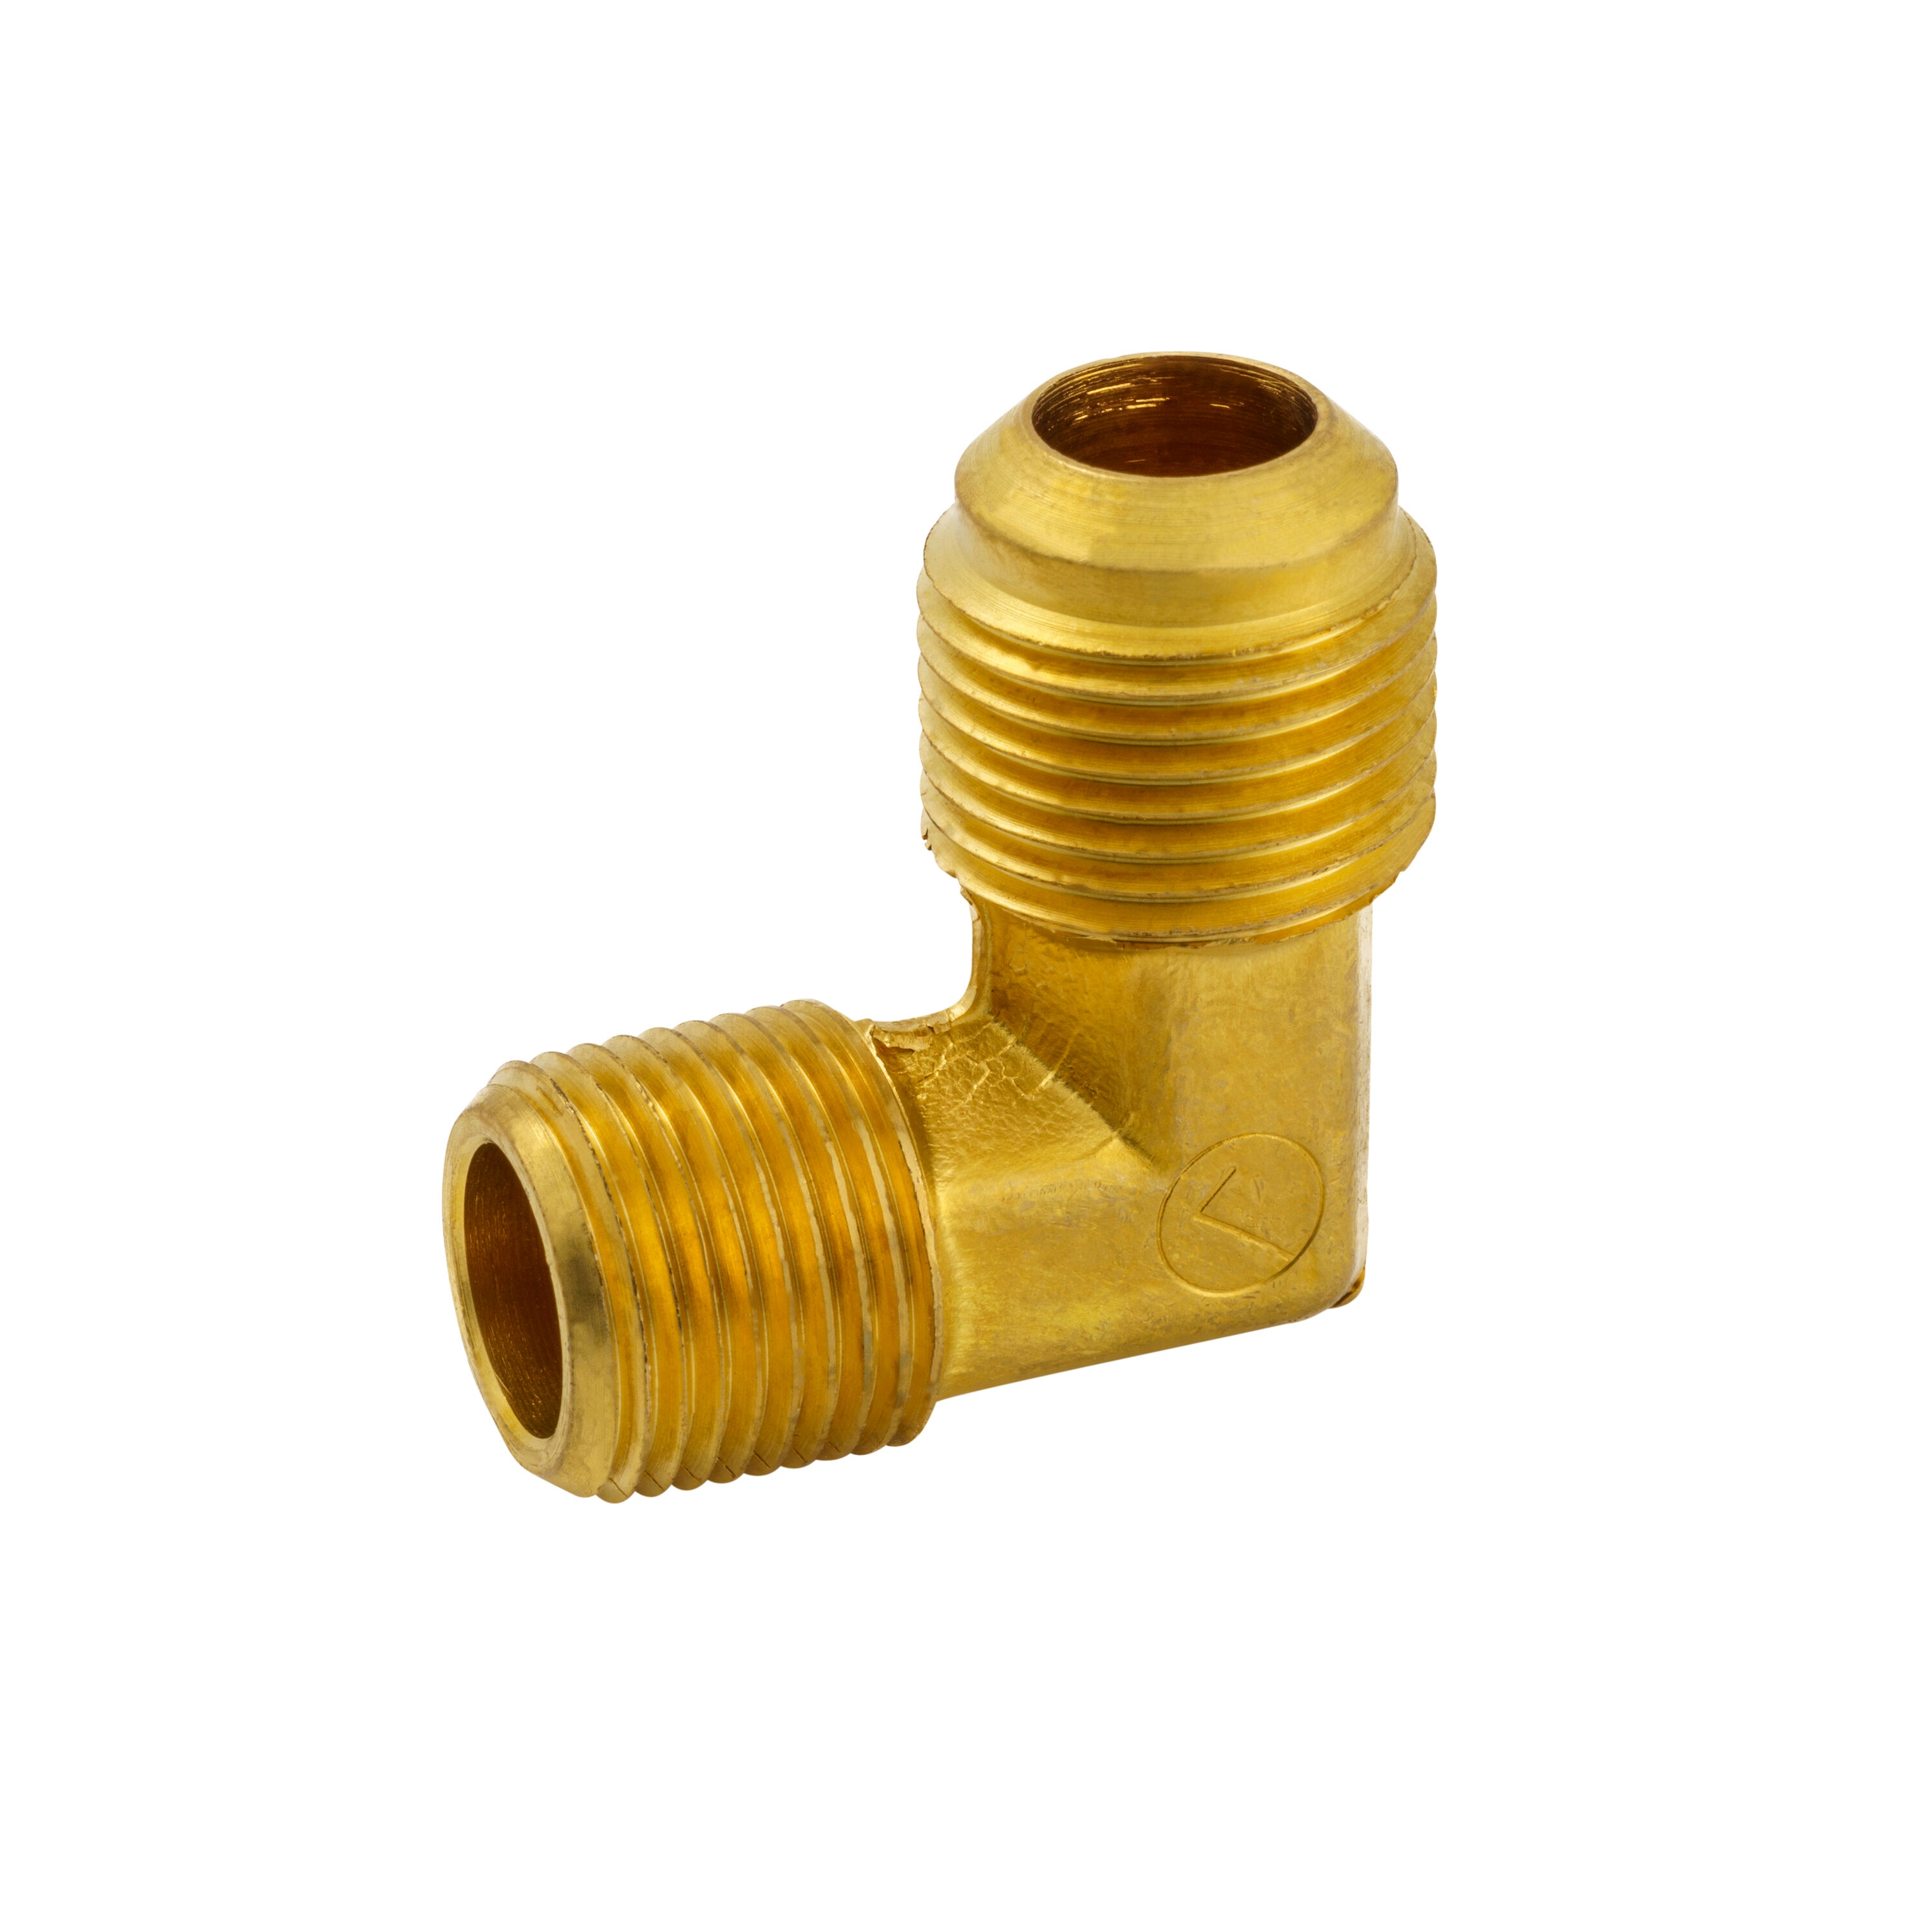 B&K 1/2 x 3/8 Dia. Threaded Flare x MIP Elbow Fitting in Gold - Each